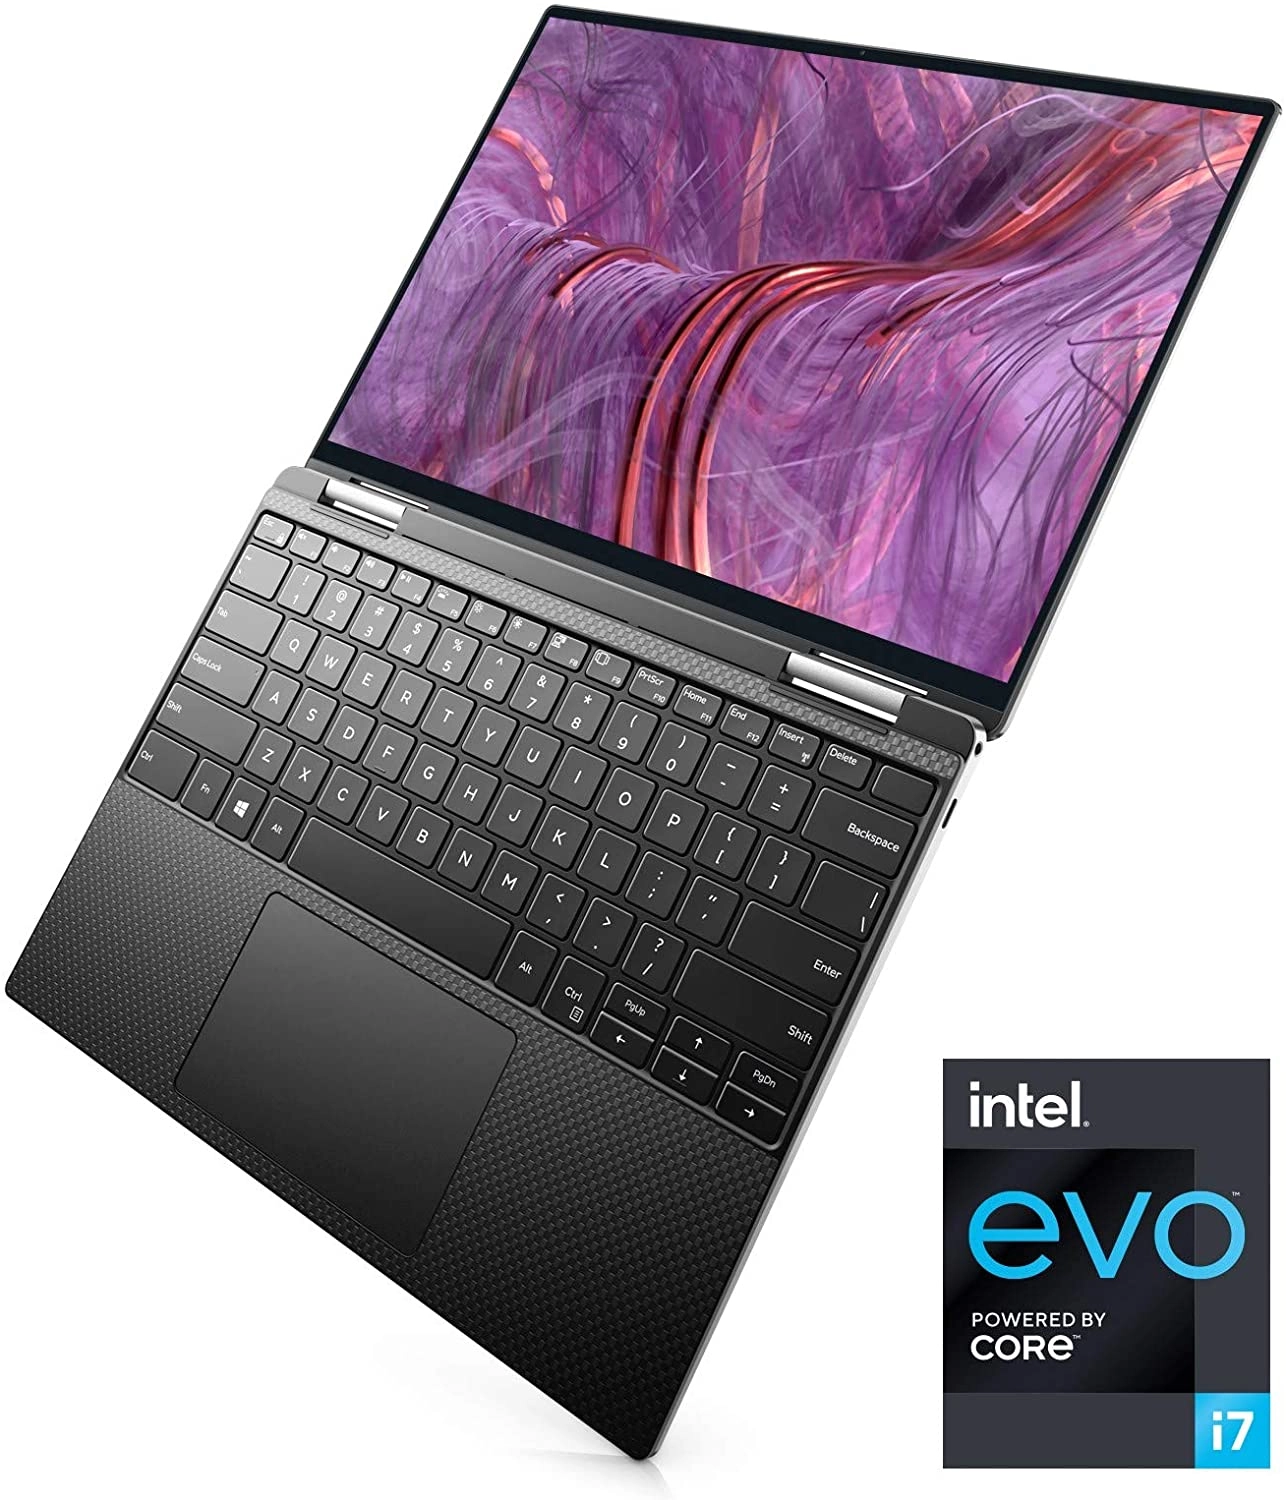 Dell XPS 13 2in1 laptop image